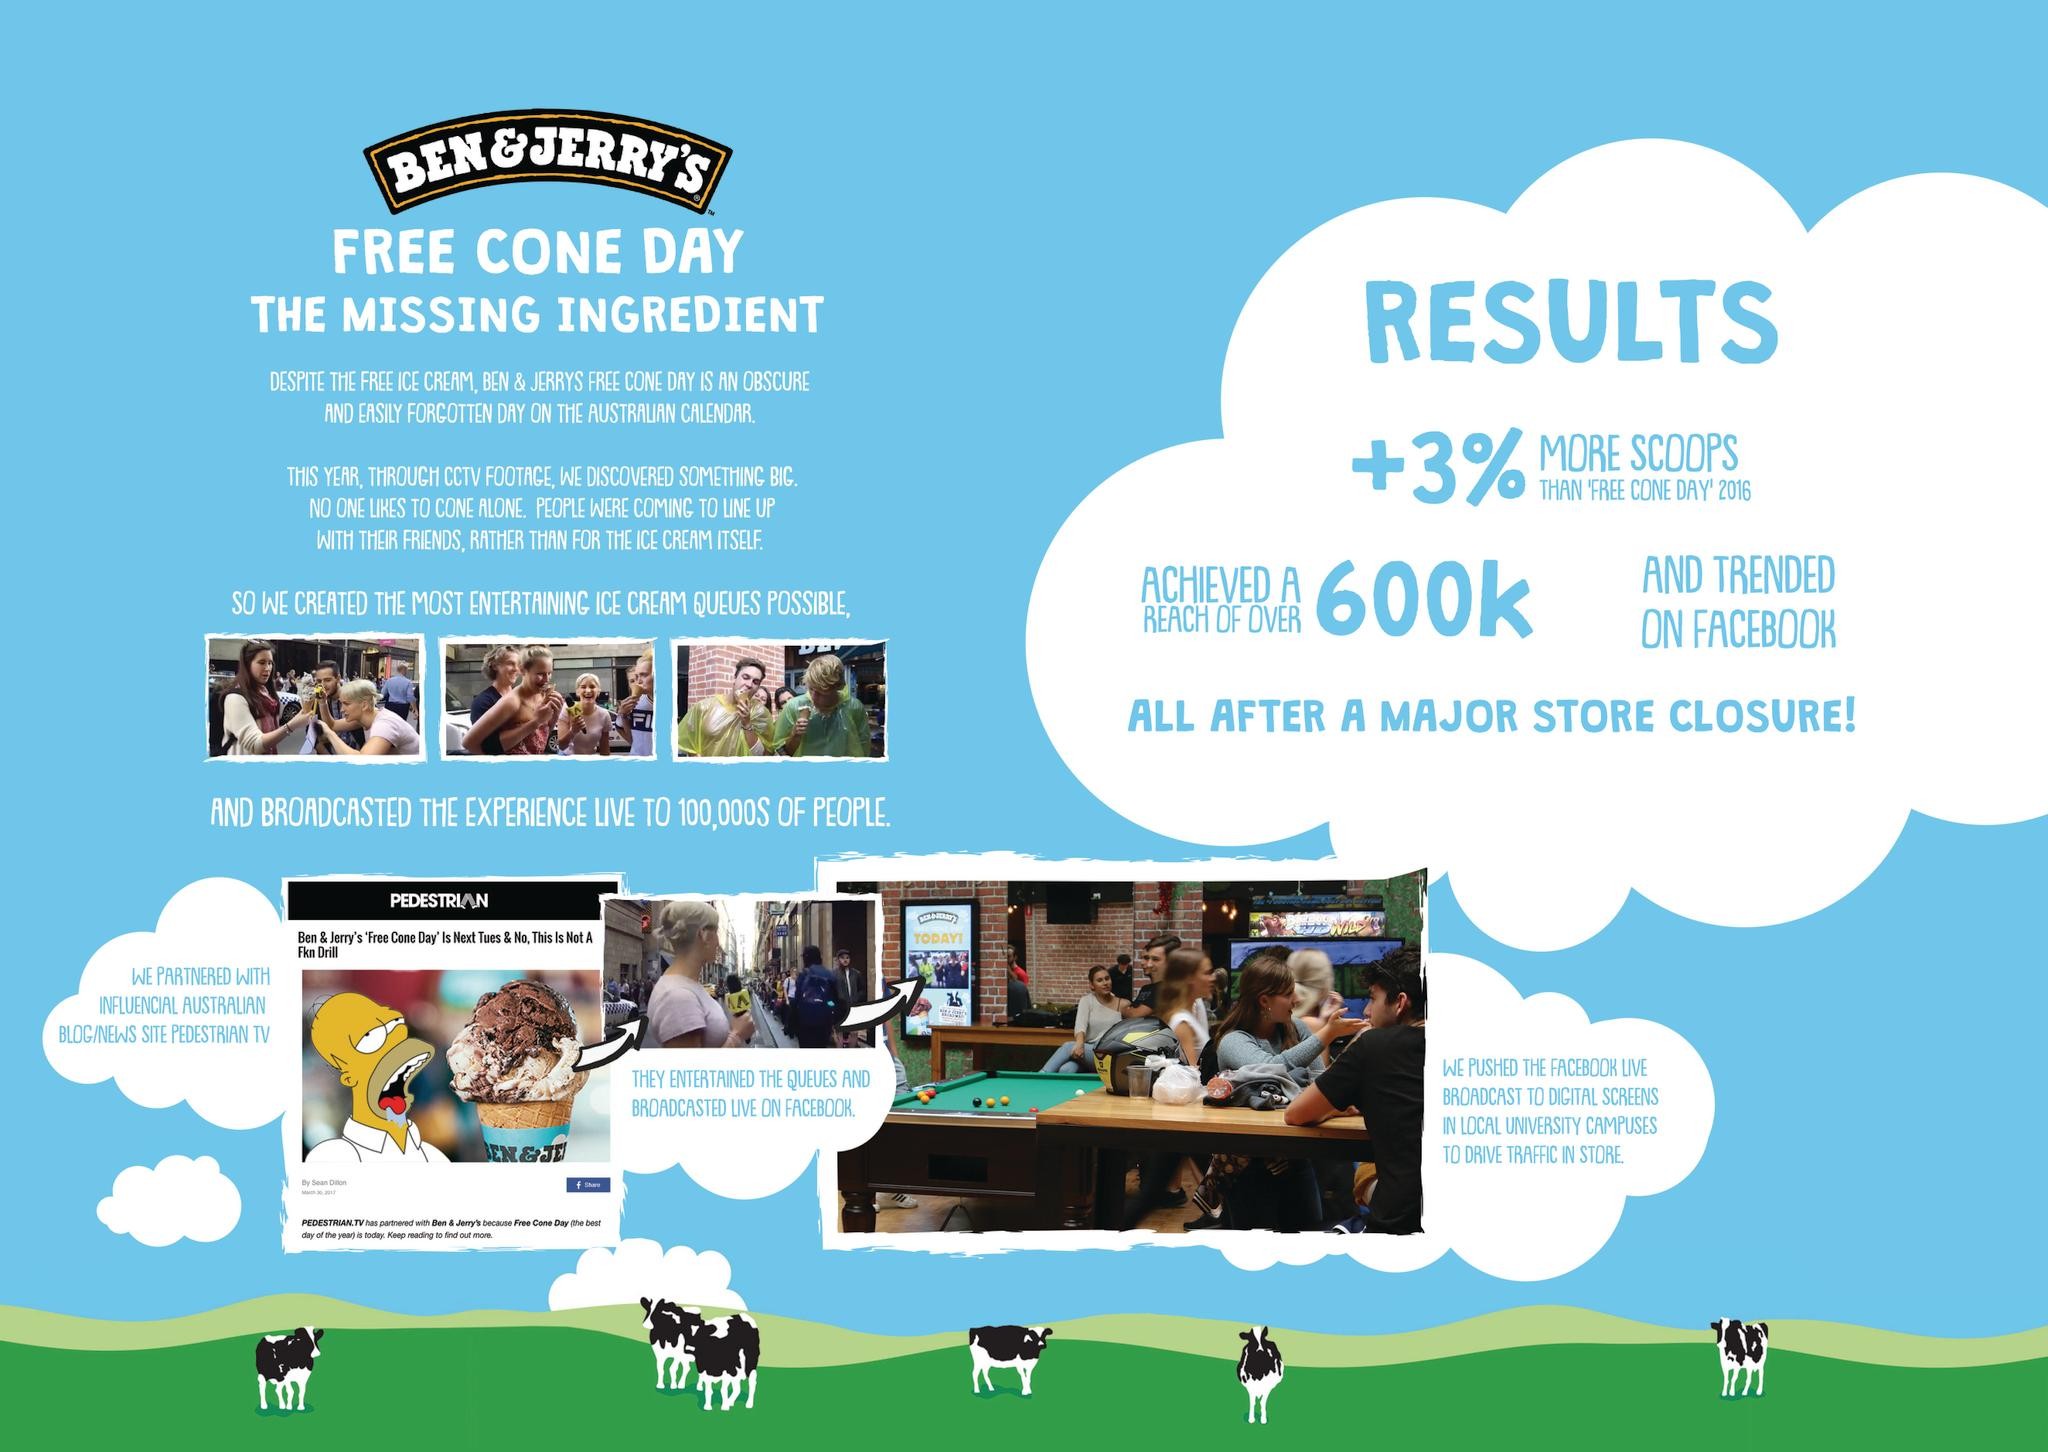 Ben & Jerry's, If it's not fun, why do it